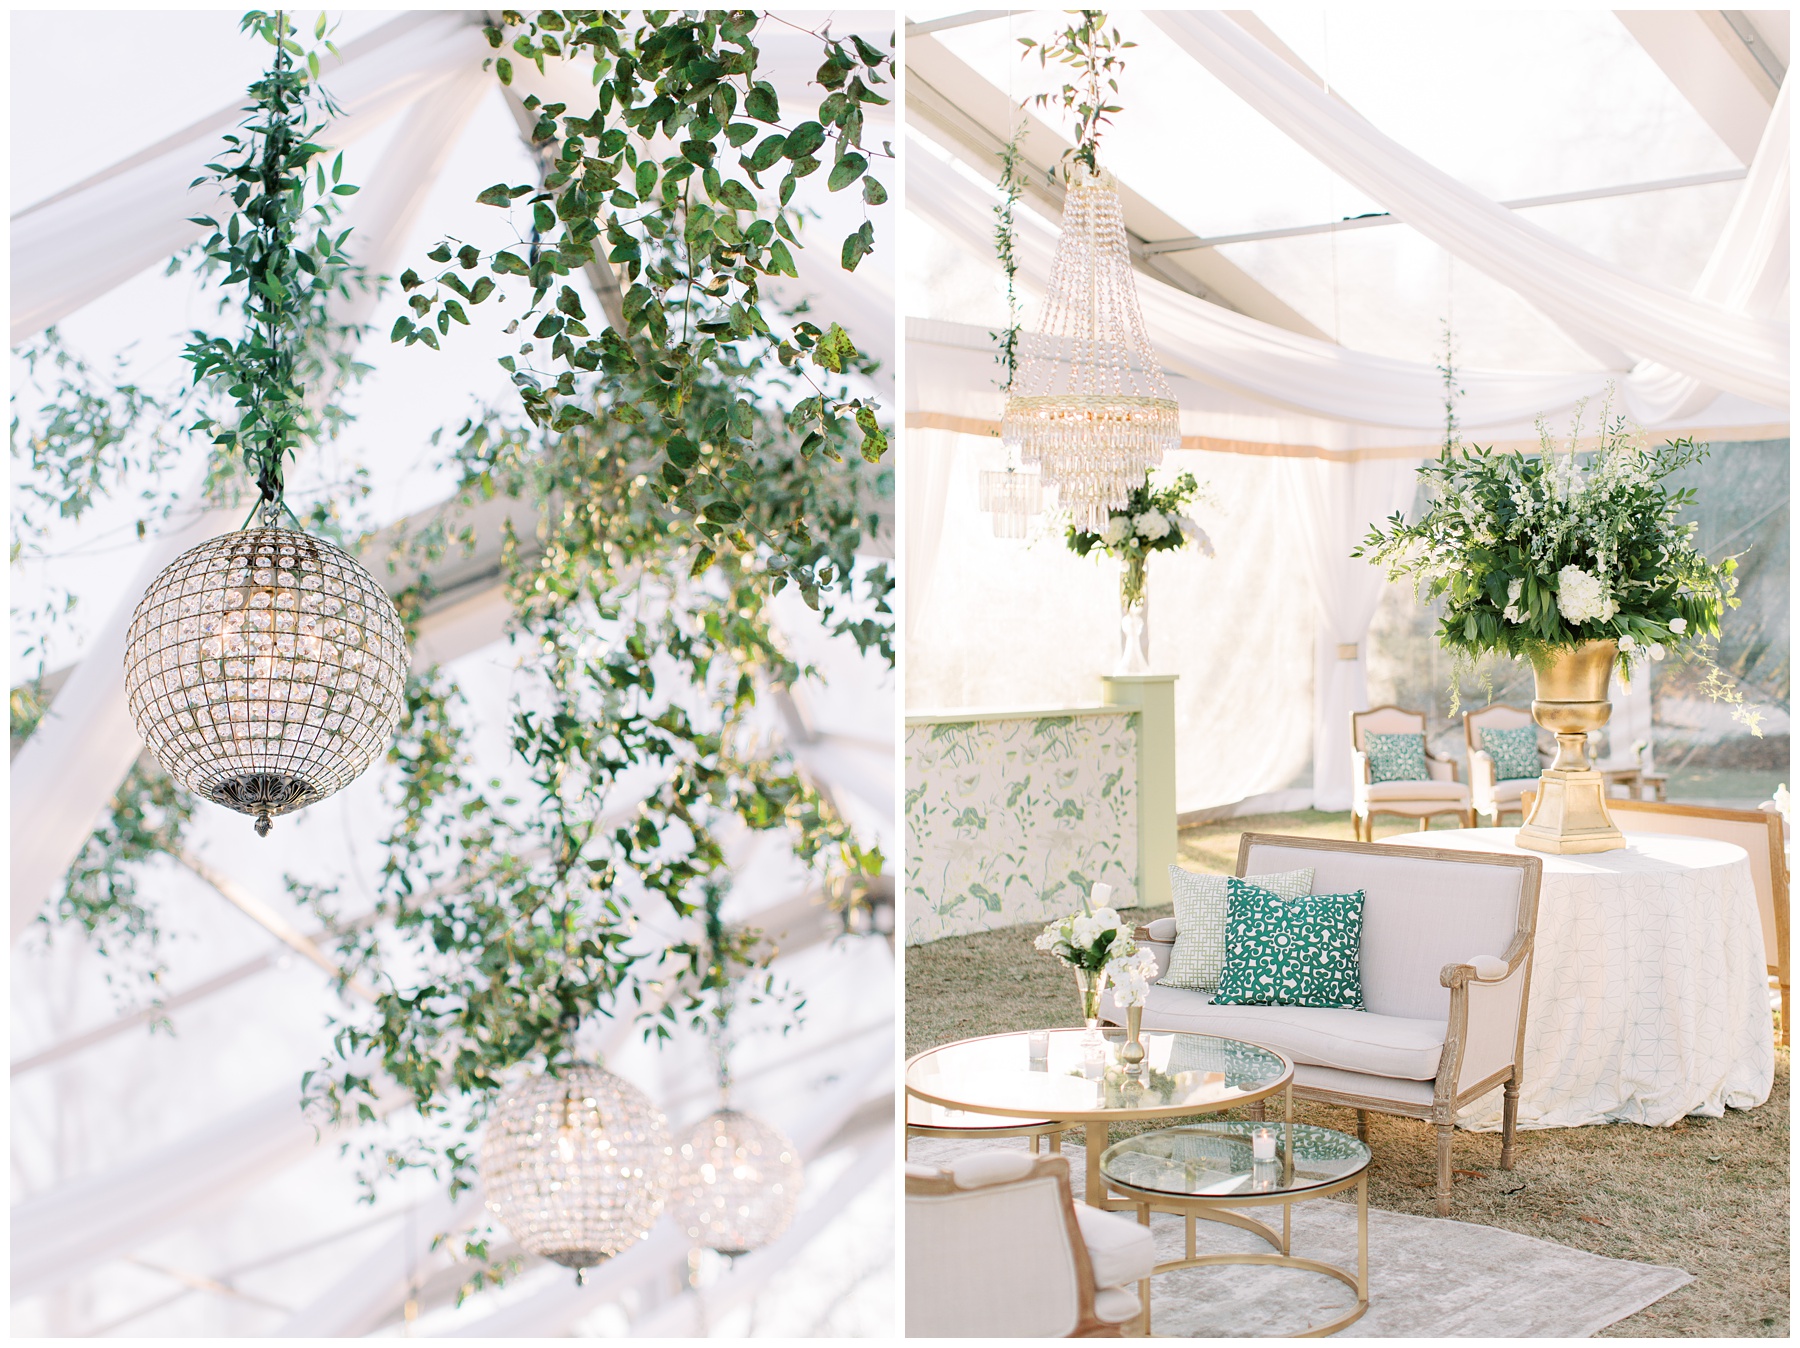 tented wedding reception with hanging chandeliers and green vines at Quail Hollow Club